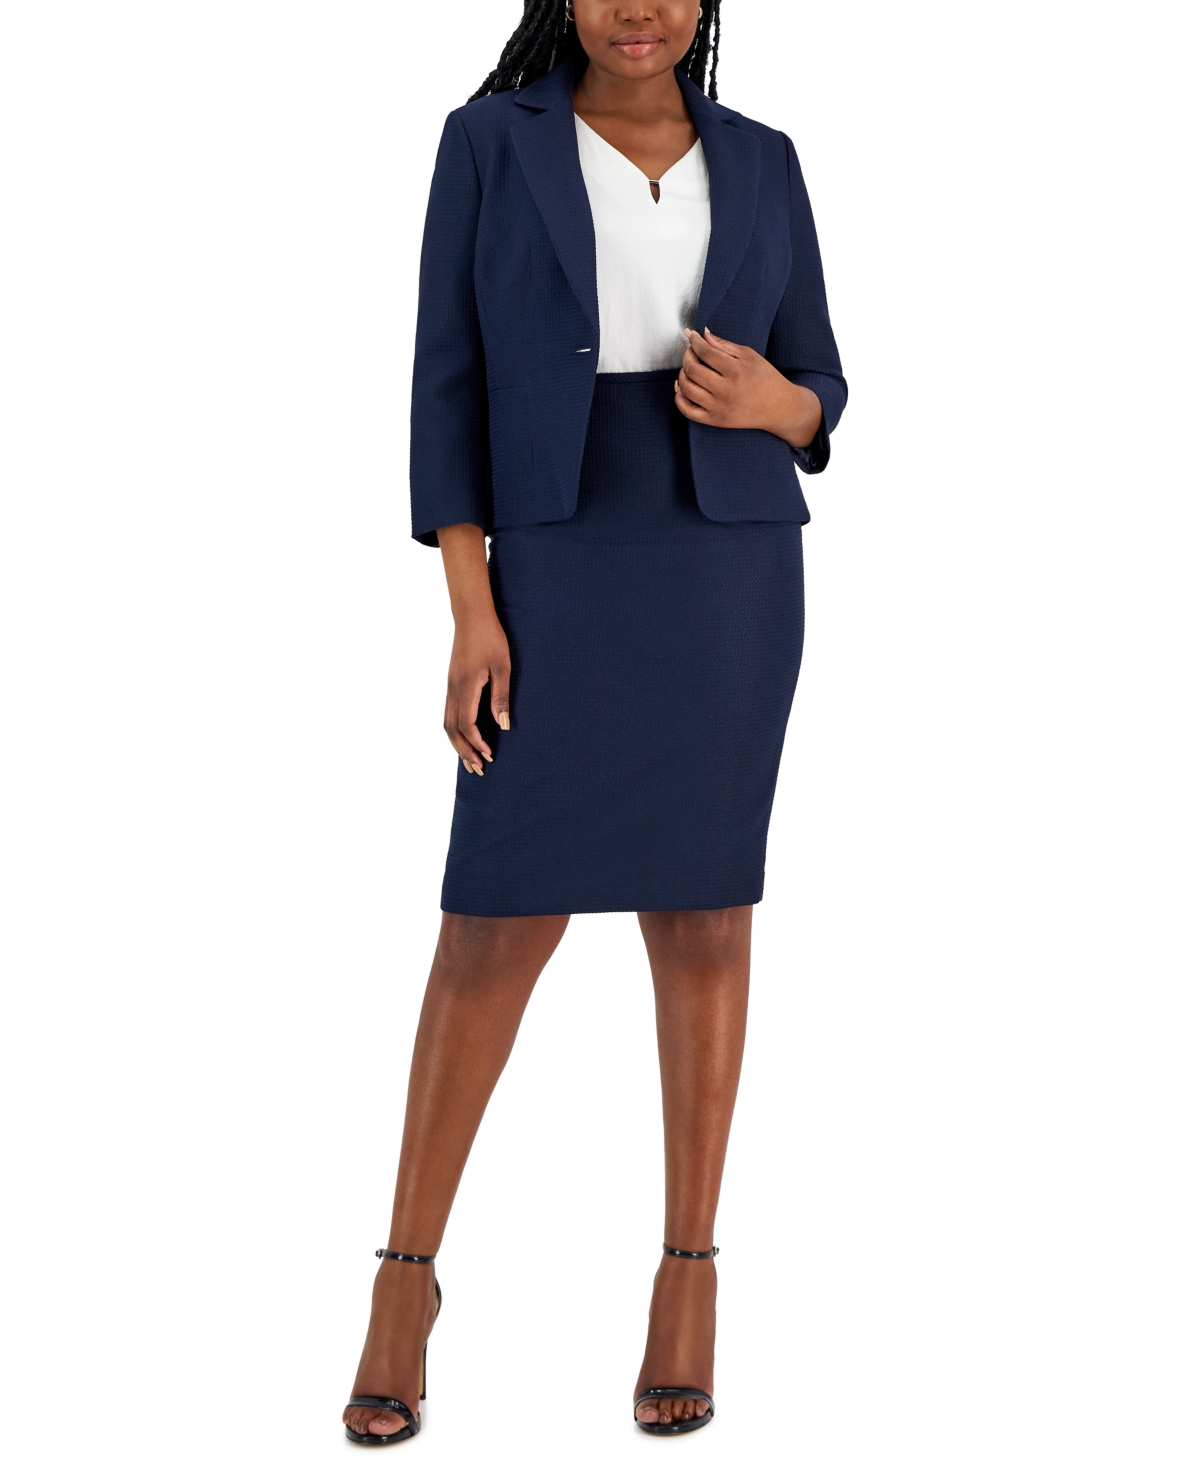 Le Suit Jacquard Single Button Jacket And Pencil Skirt Set, Regular And Petite Sizes In Navy